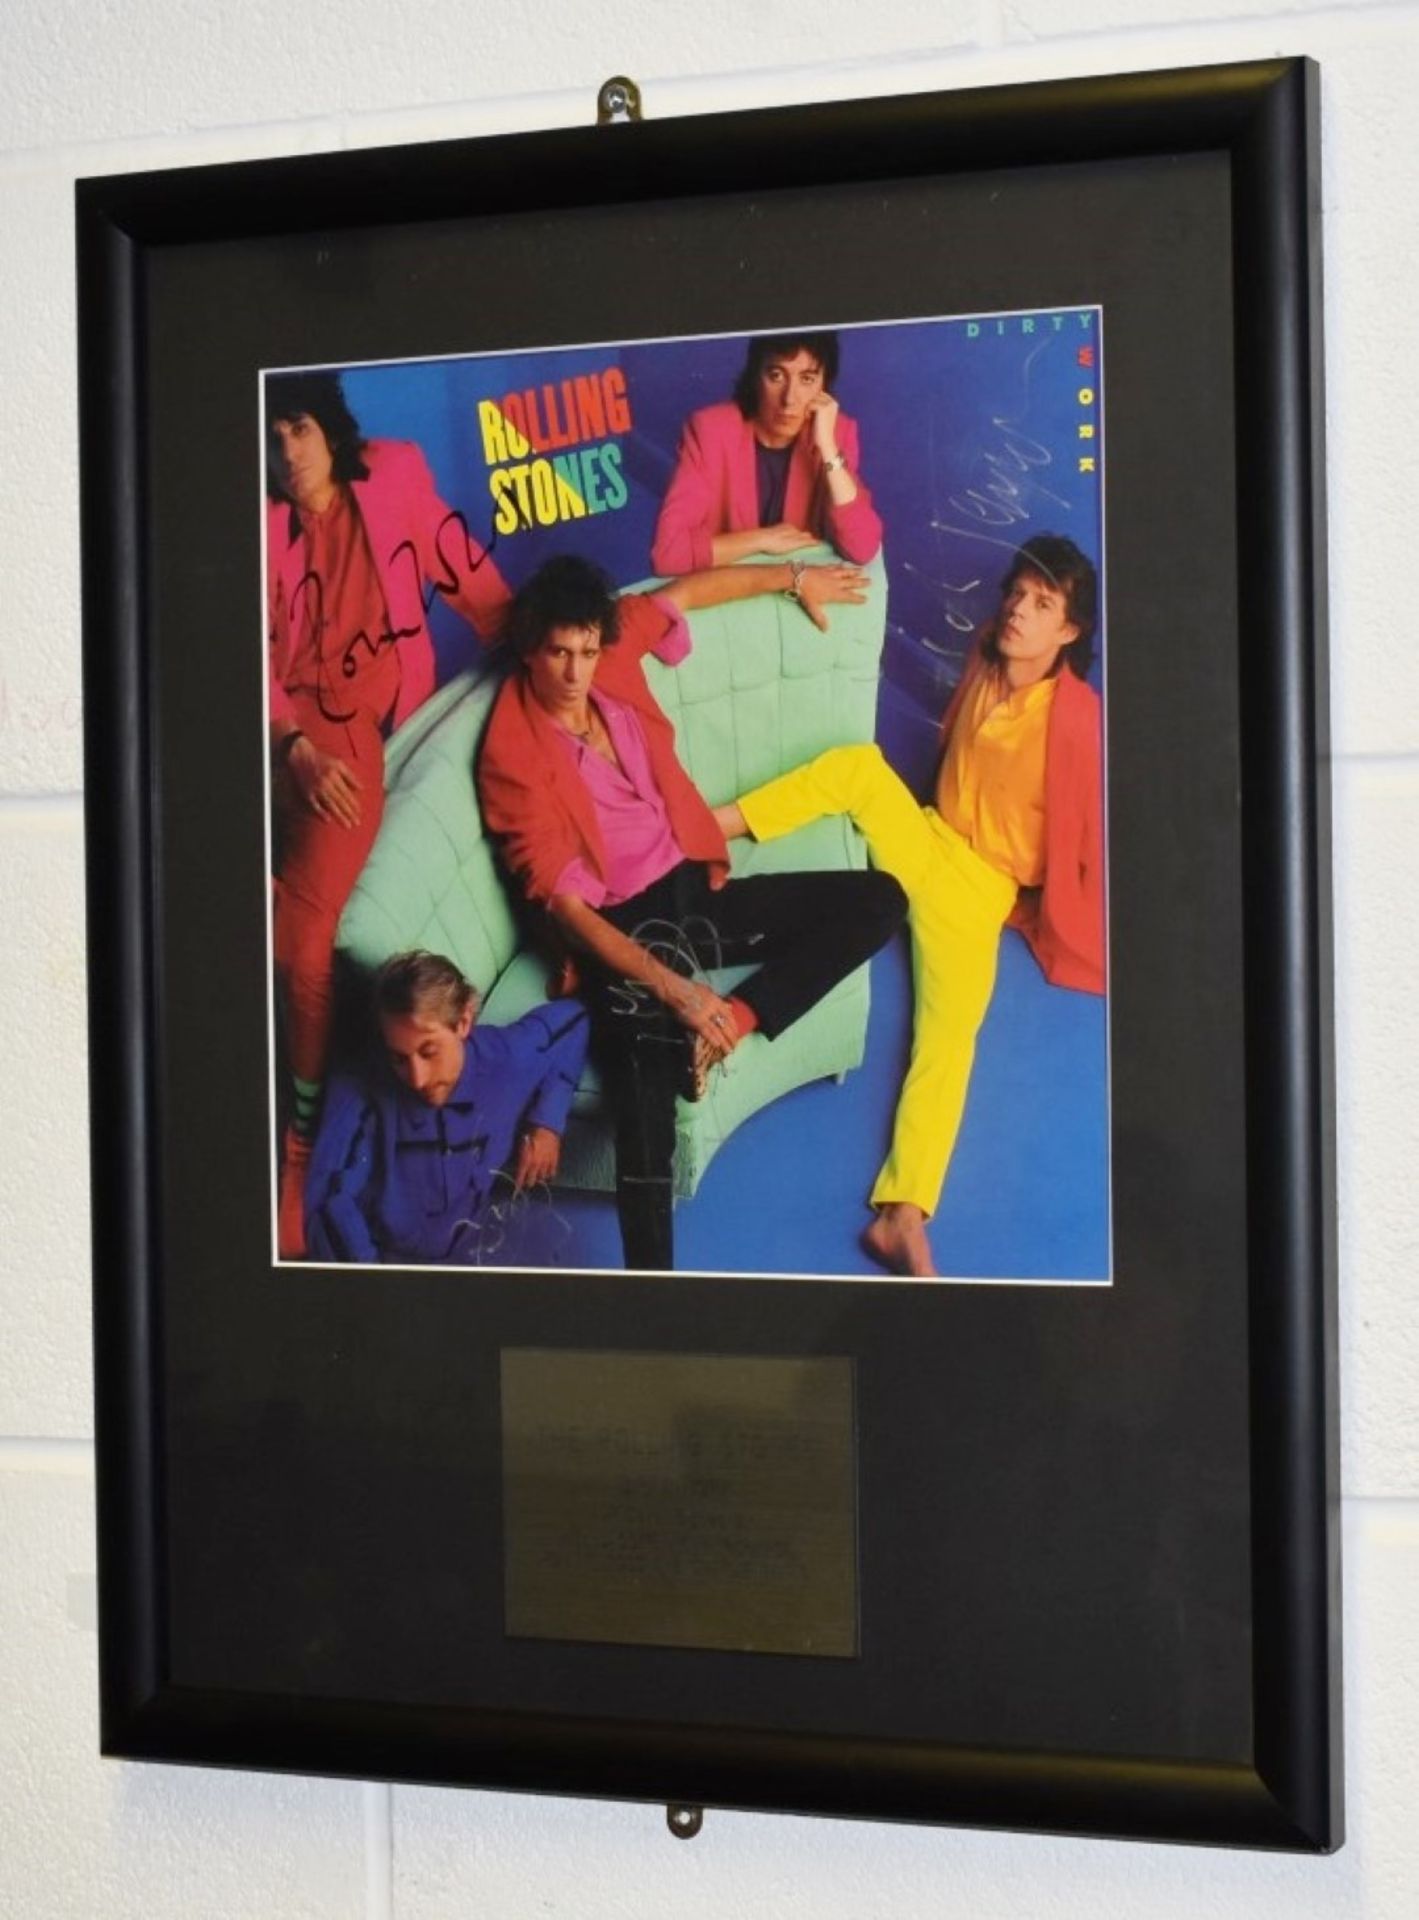 1 x Authentic ROLLING STONES Dirty Work Album Cover Signed By Jagger, Richards, Wood & Watts - Image 7 of 8